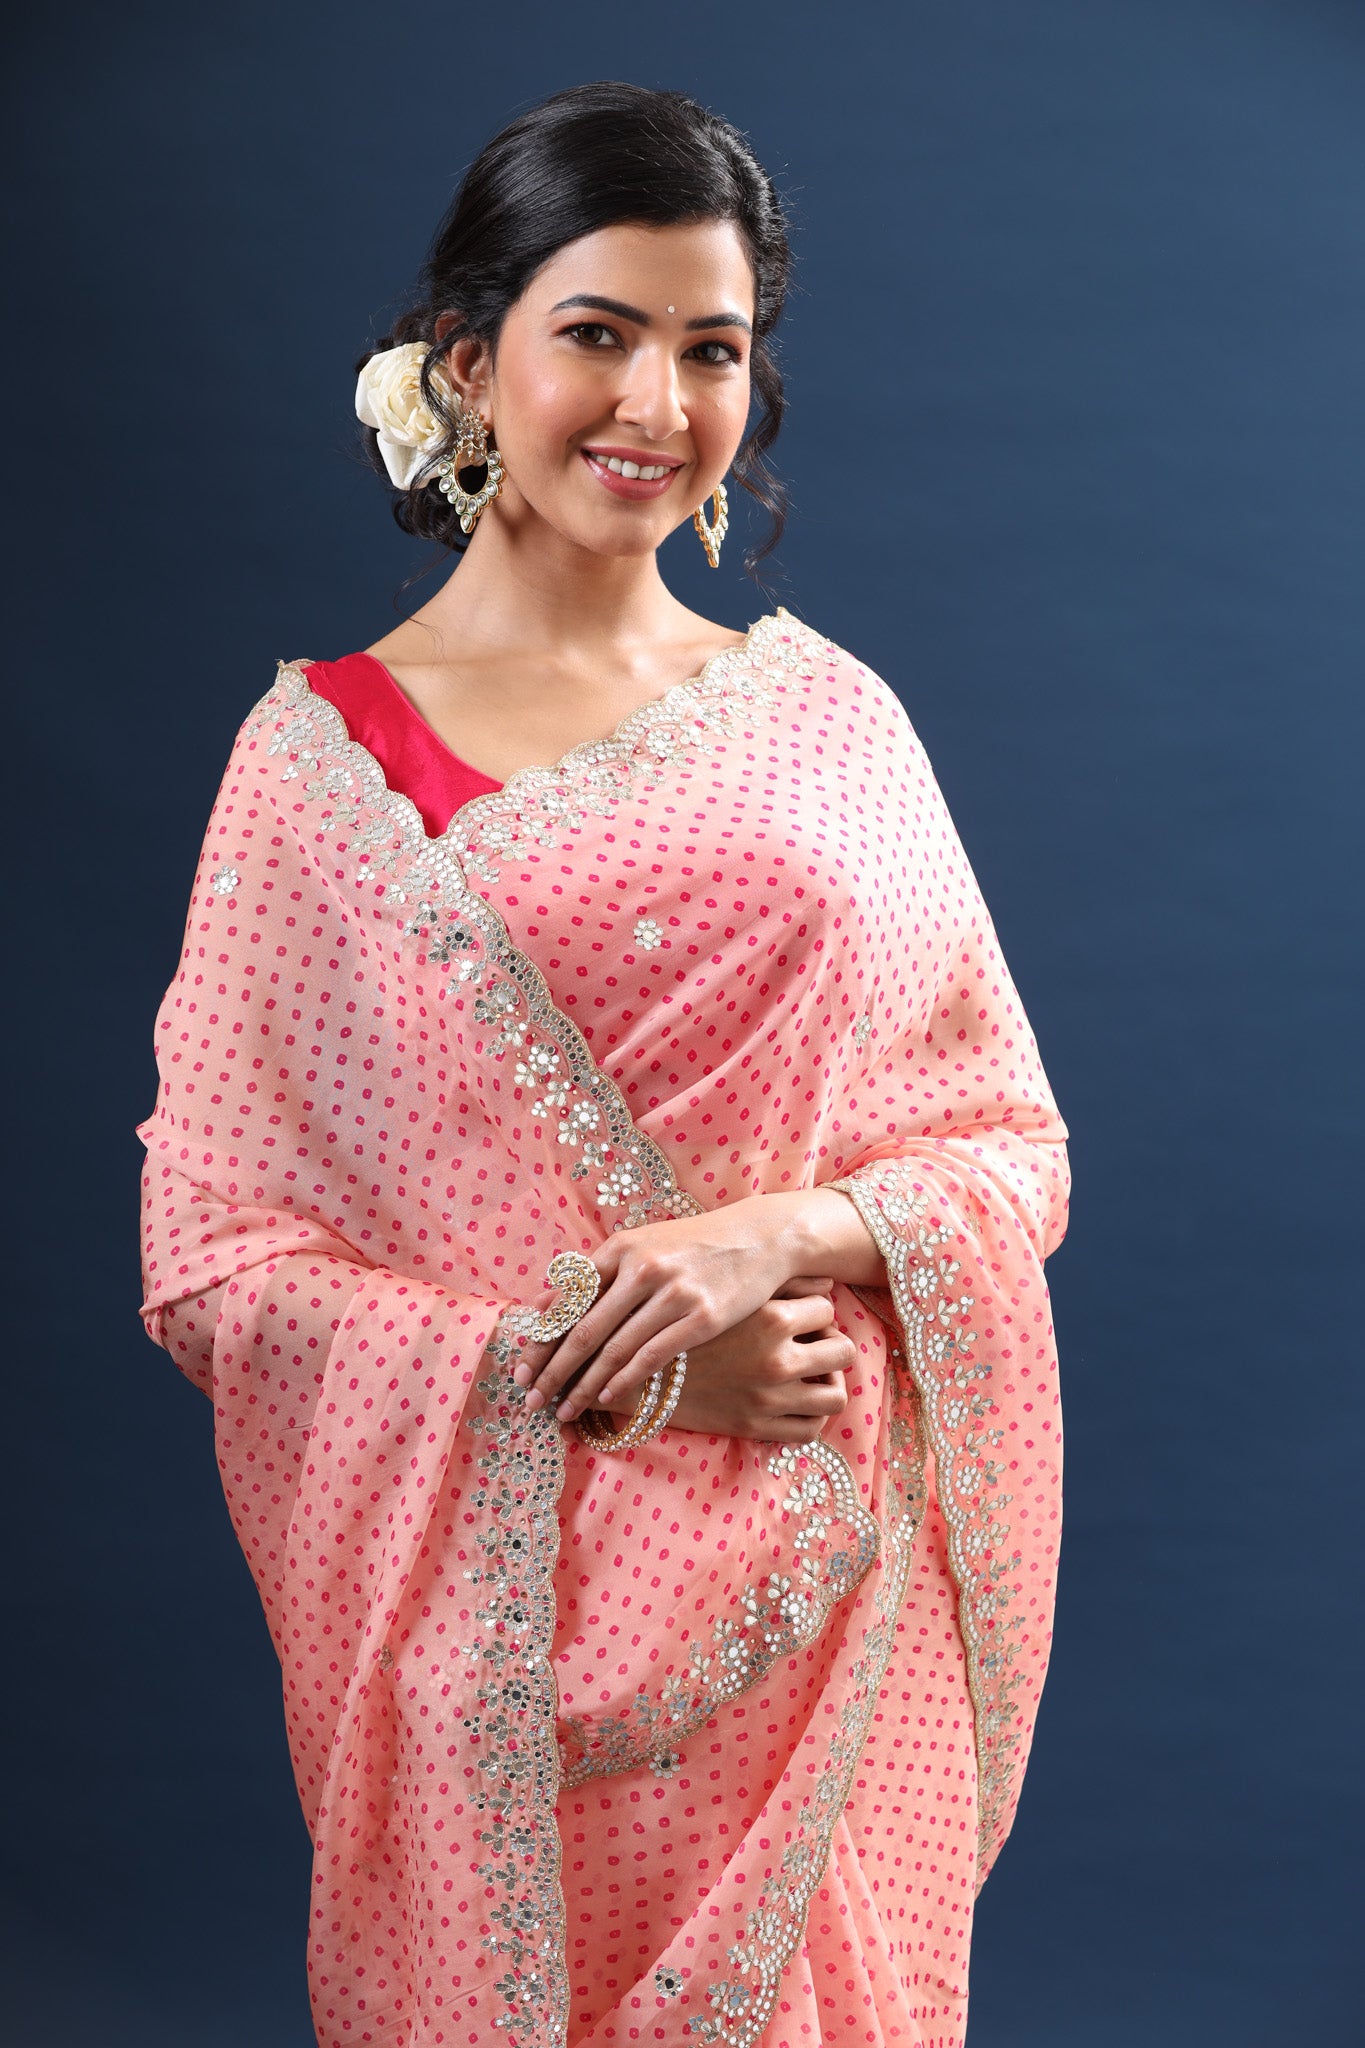 Buy powder pink bandhej organza sari online in USA with scalloped border. Make a fashion statement at weddings with stunning designer sarees, embroidered sarees with blouse, wedding sarees, handloom sarees from Pure Elegance Indian fashion store in USA.-closeup